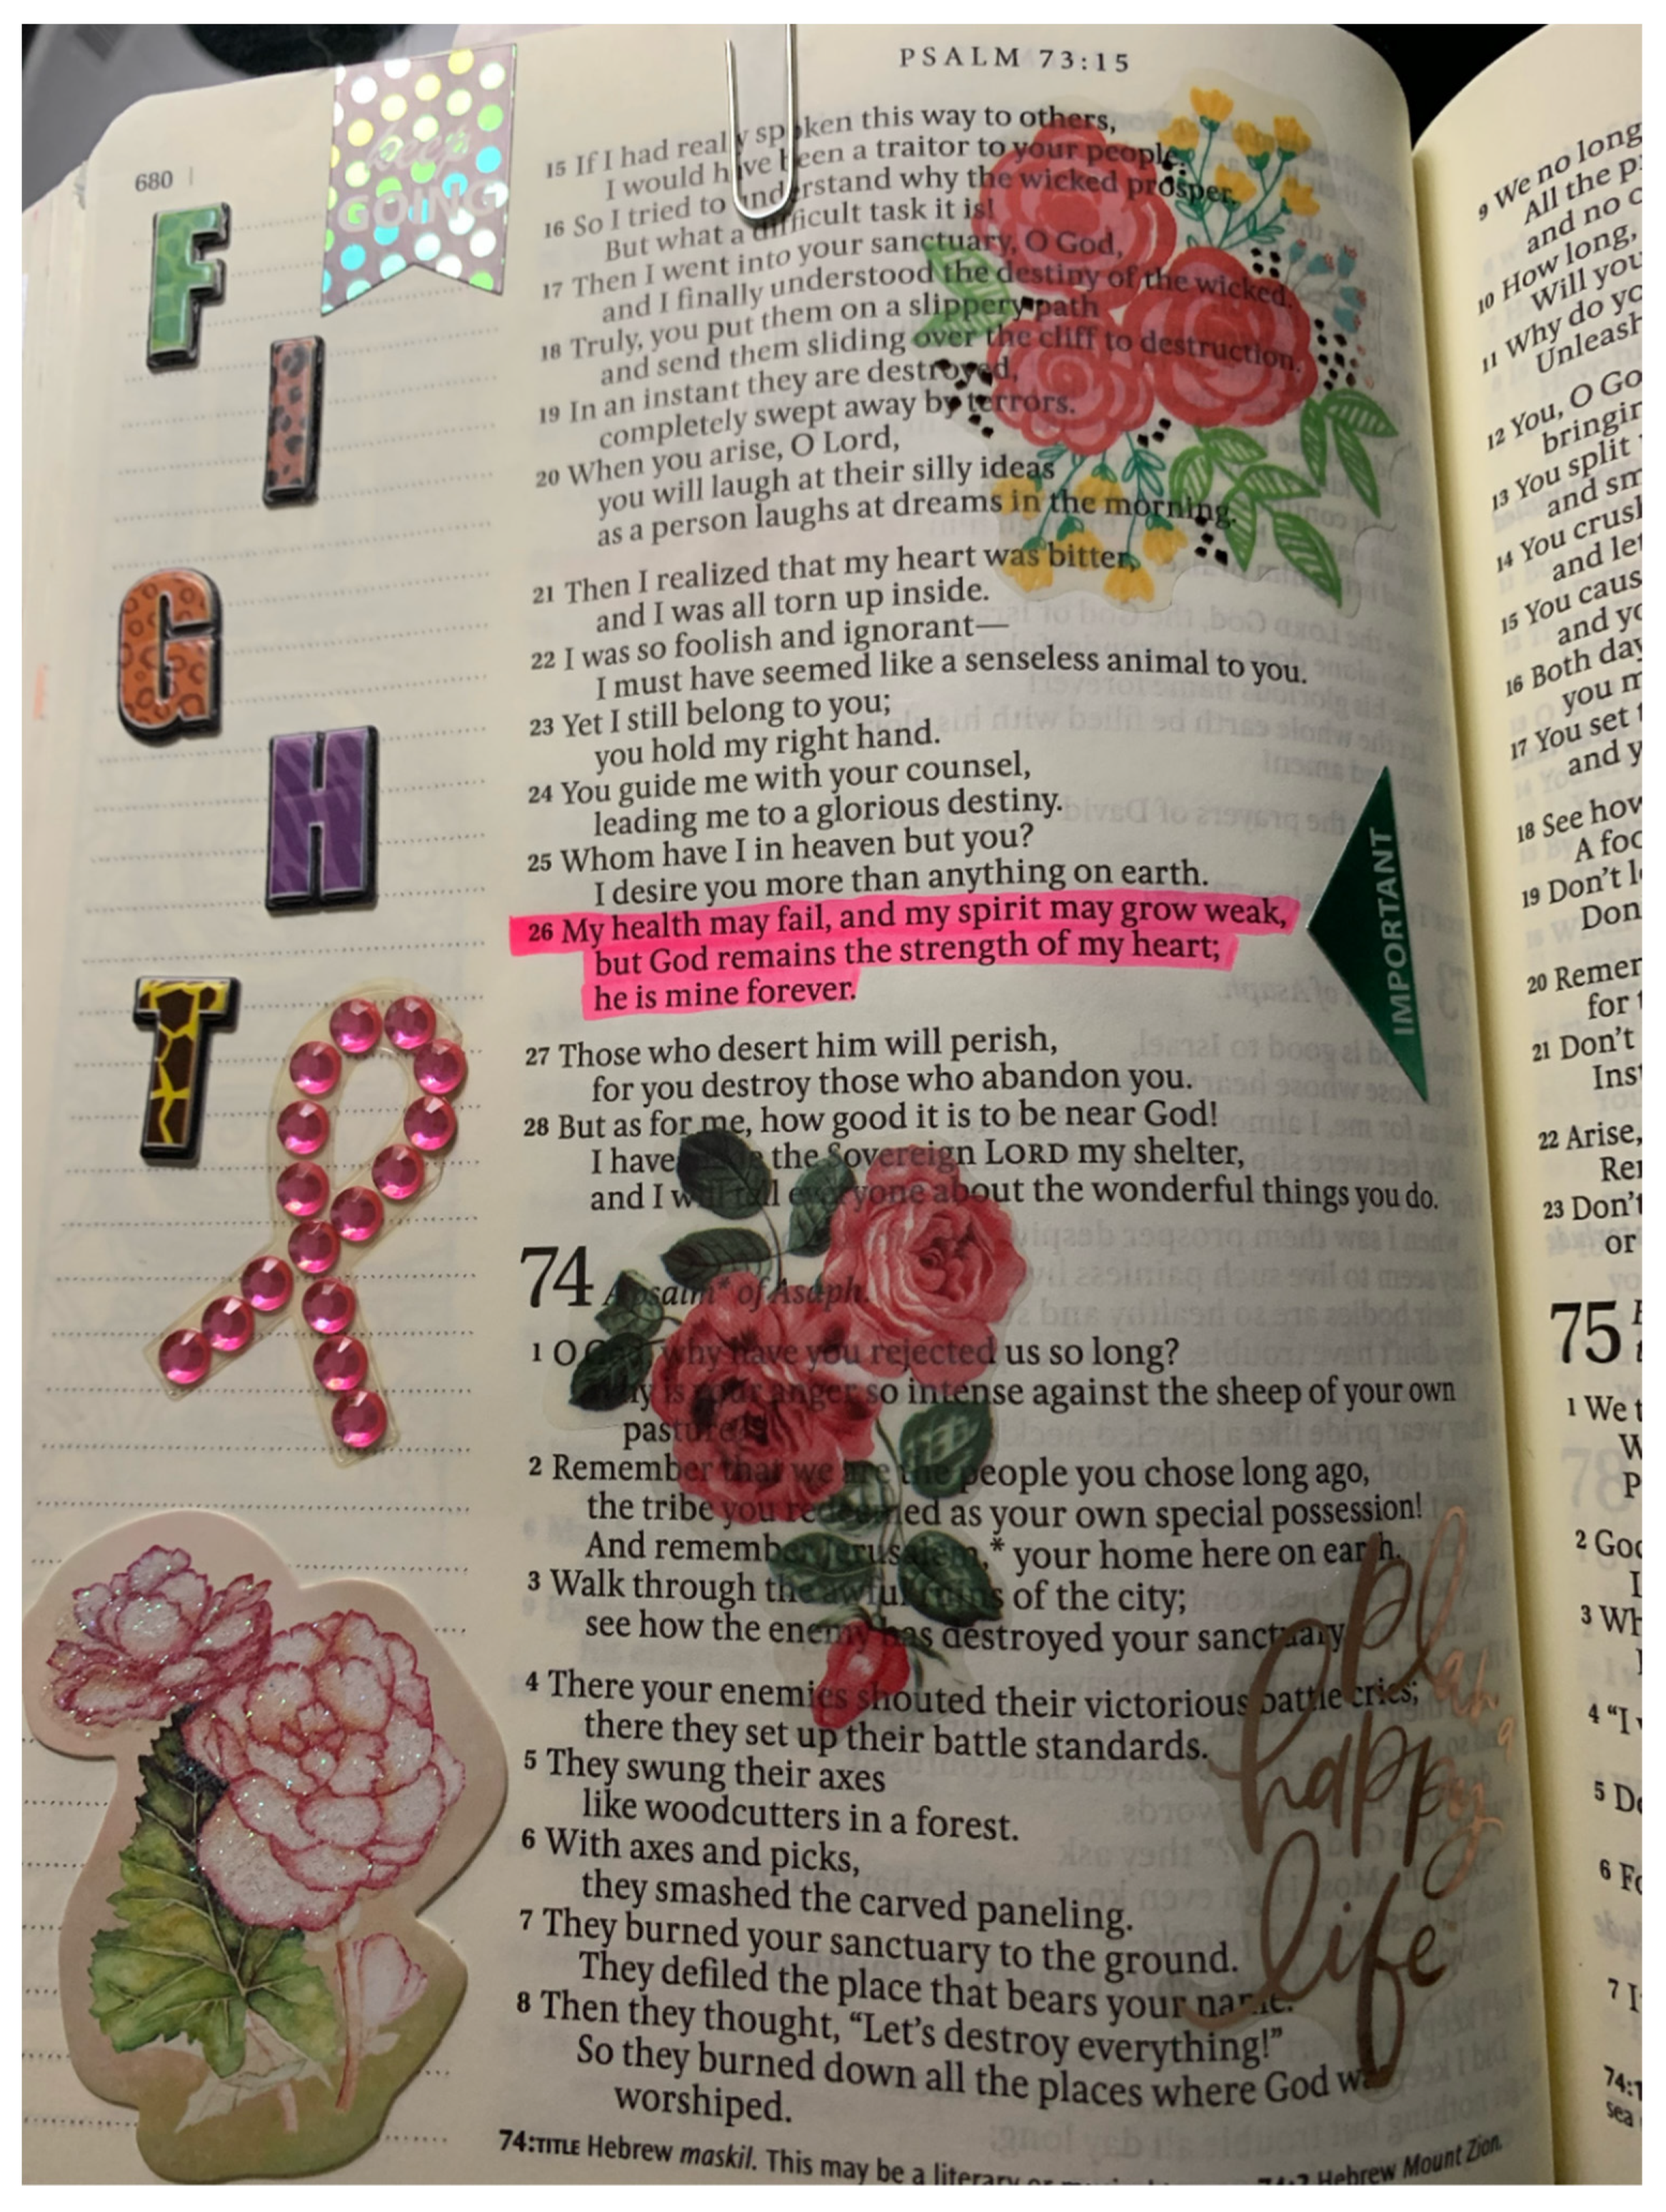 Bible Journaling Kit With Gel Highlighters and Pens No Bleed, Bible Safe  Scripture Color Pencils, Faith Stencils Perfect for Christian Gifts 